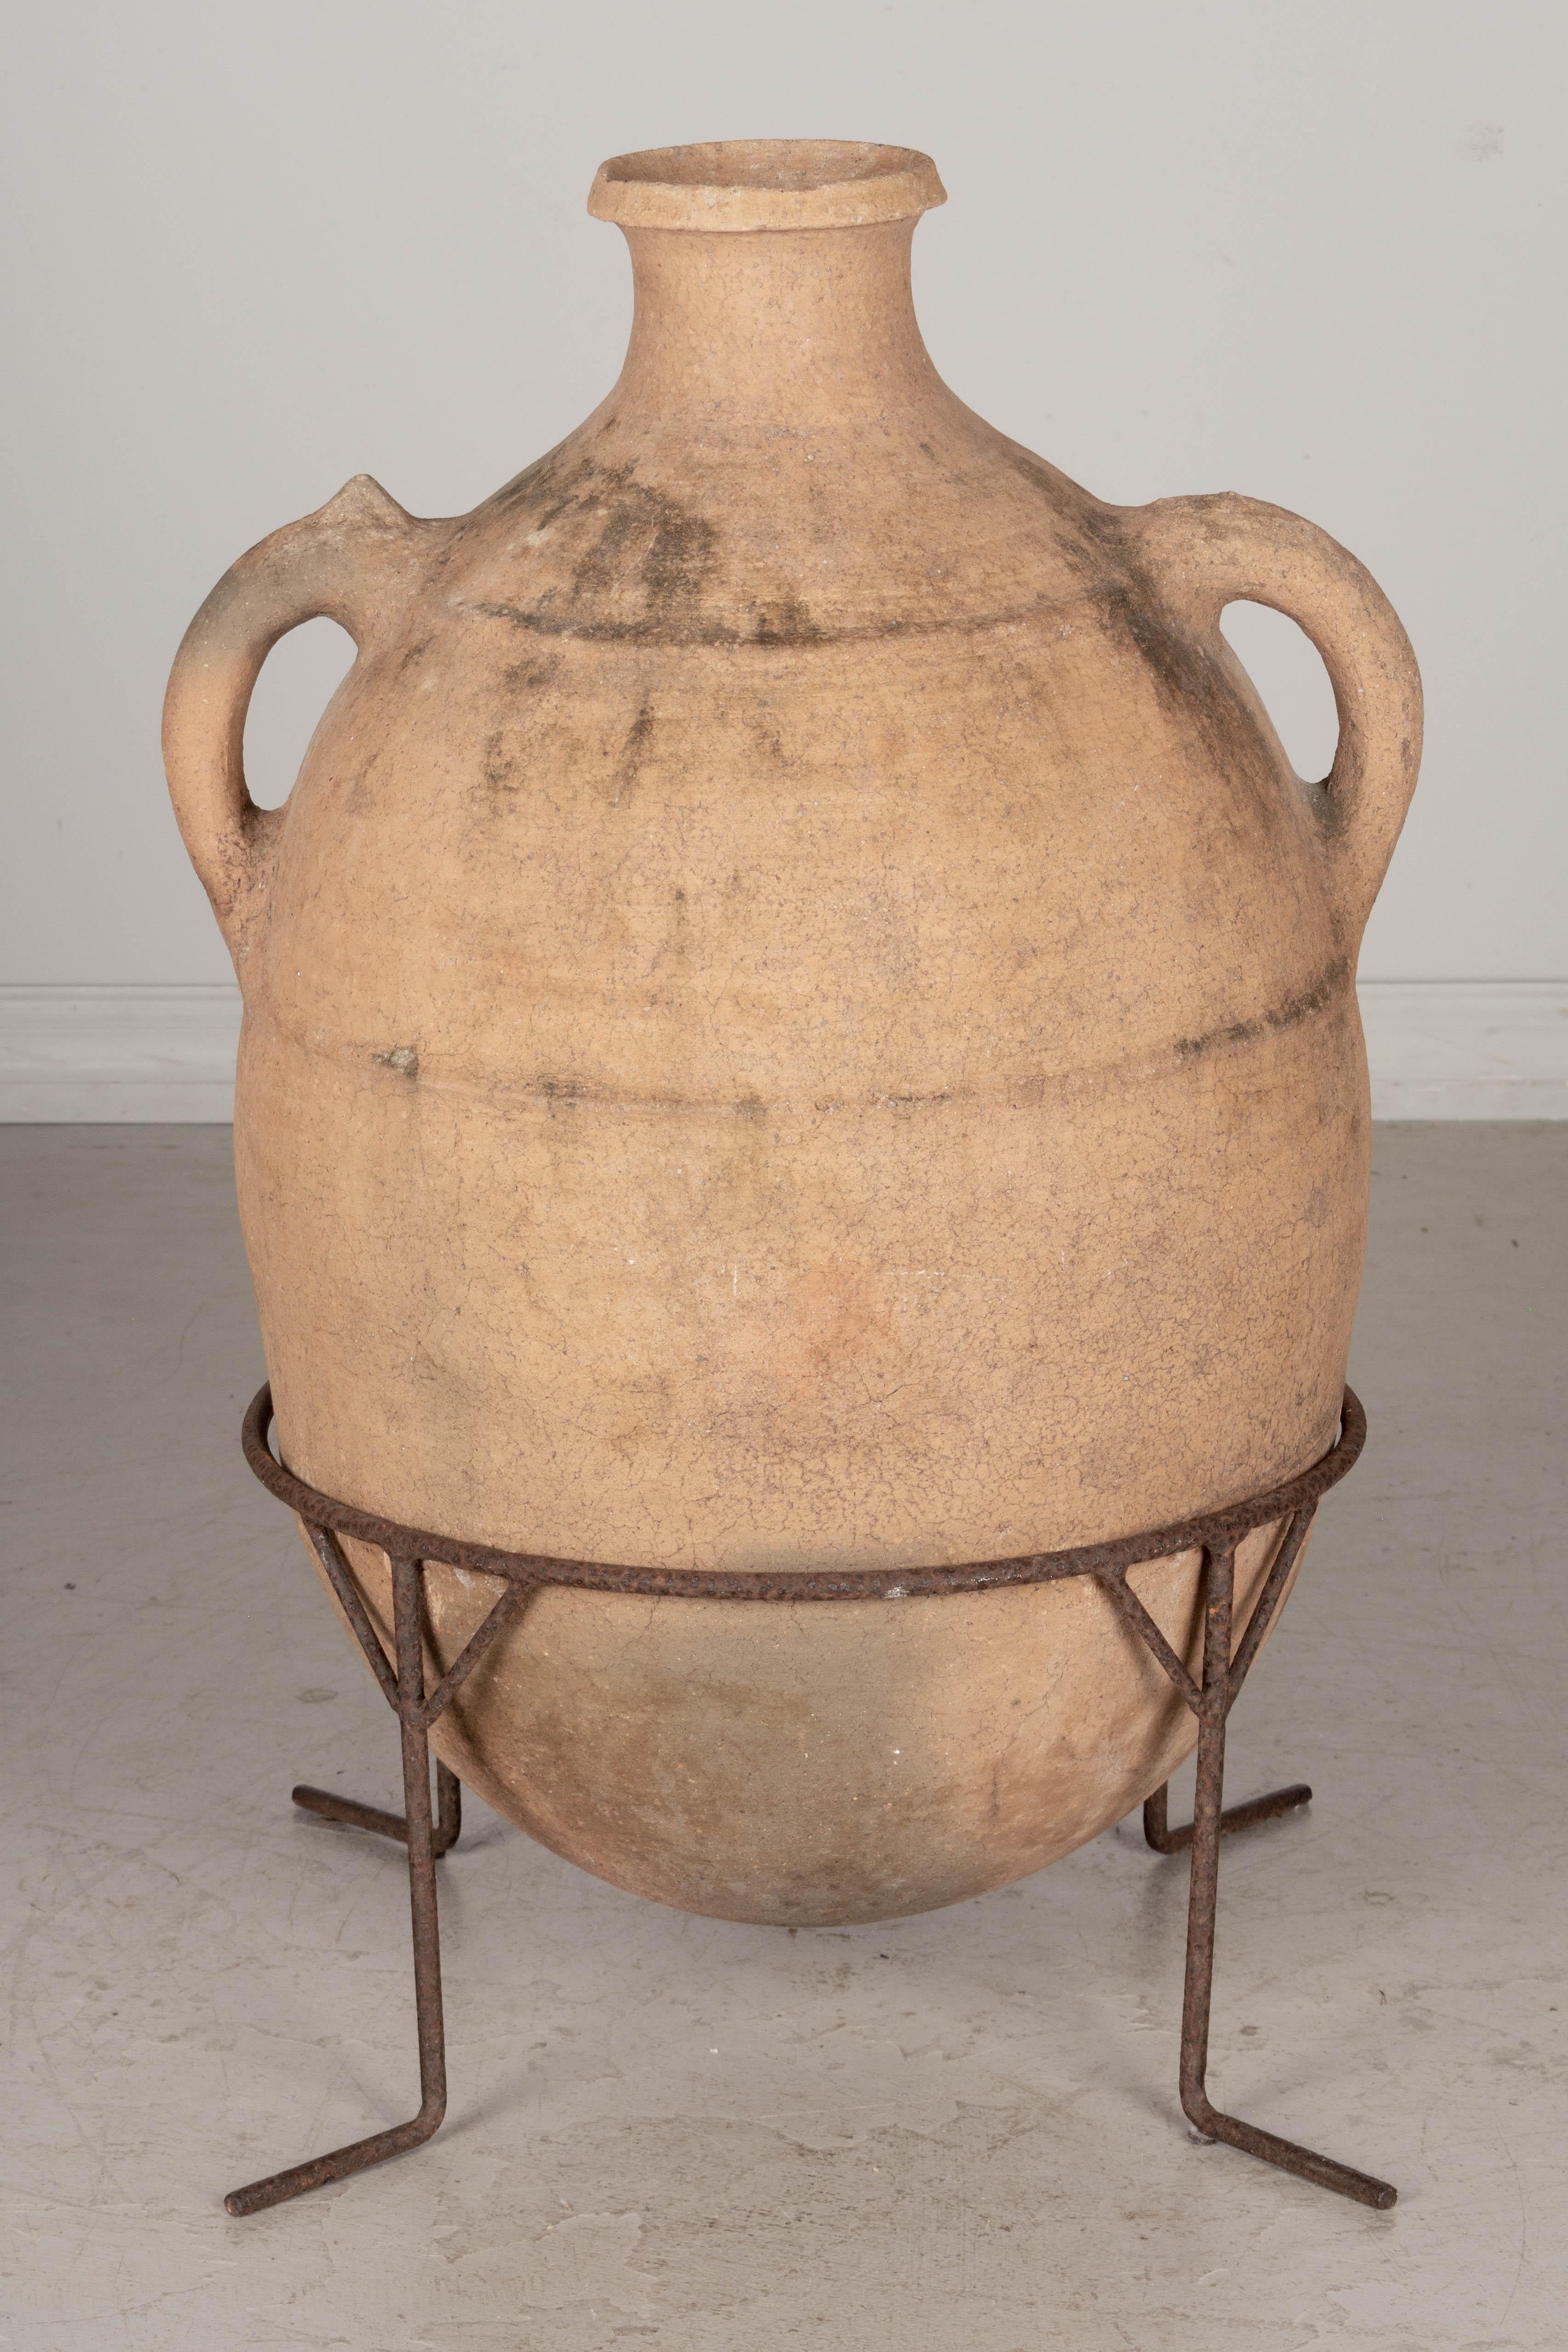 A large Moroccan terracotta pottery water jar resting in an iron stand. Oval form with rounded bottom and two small handles. Iron has rusty patina. Minor chips. Beautiful clay color. 
Overall dimensions including stand: 28